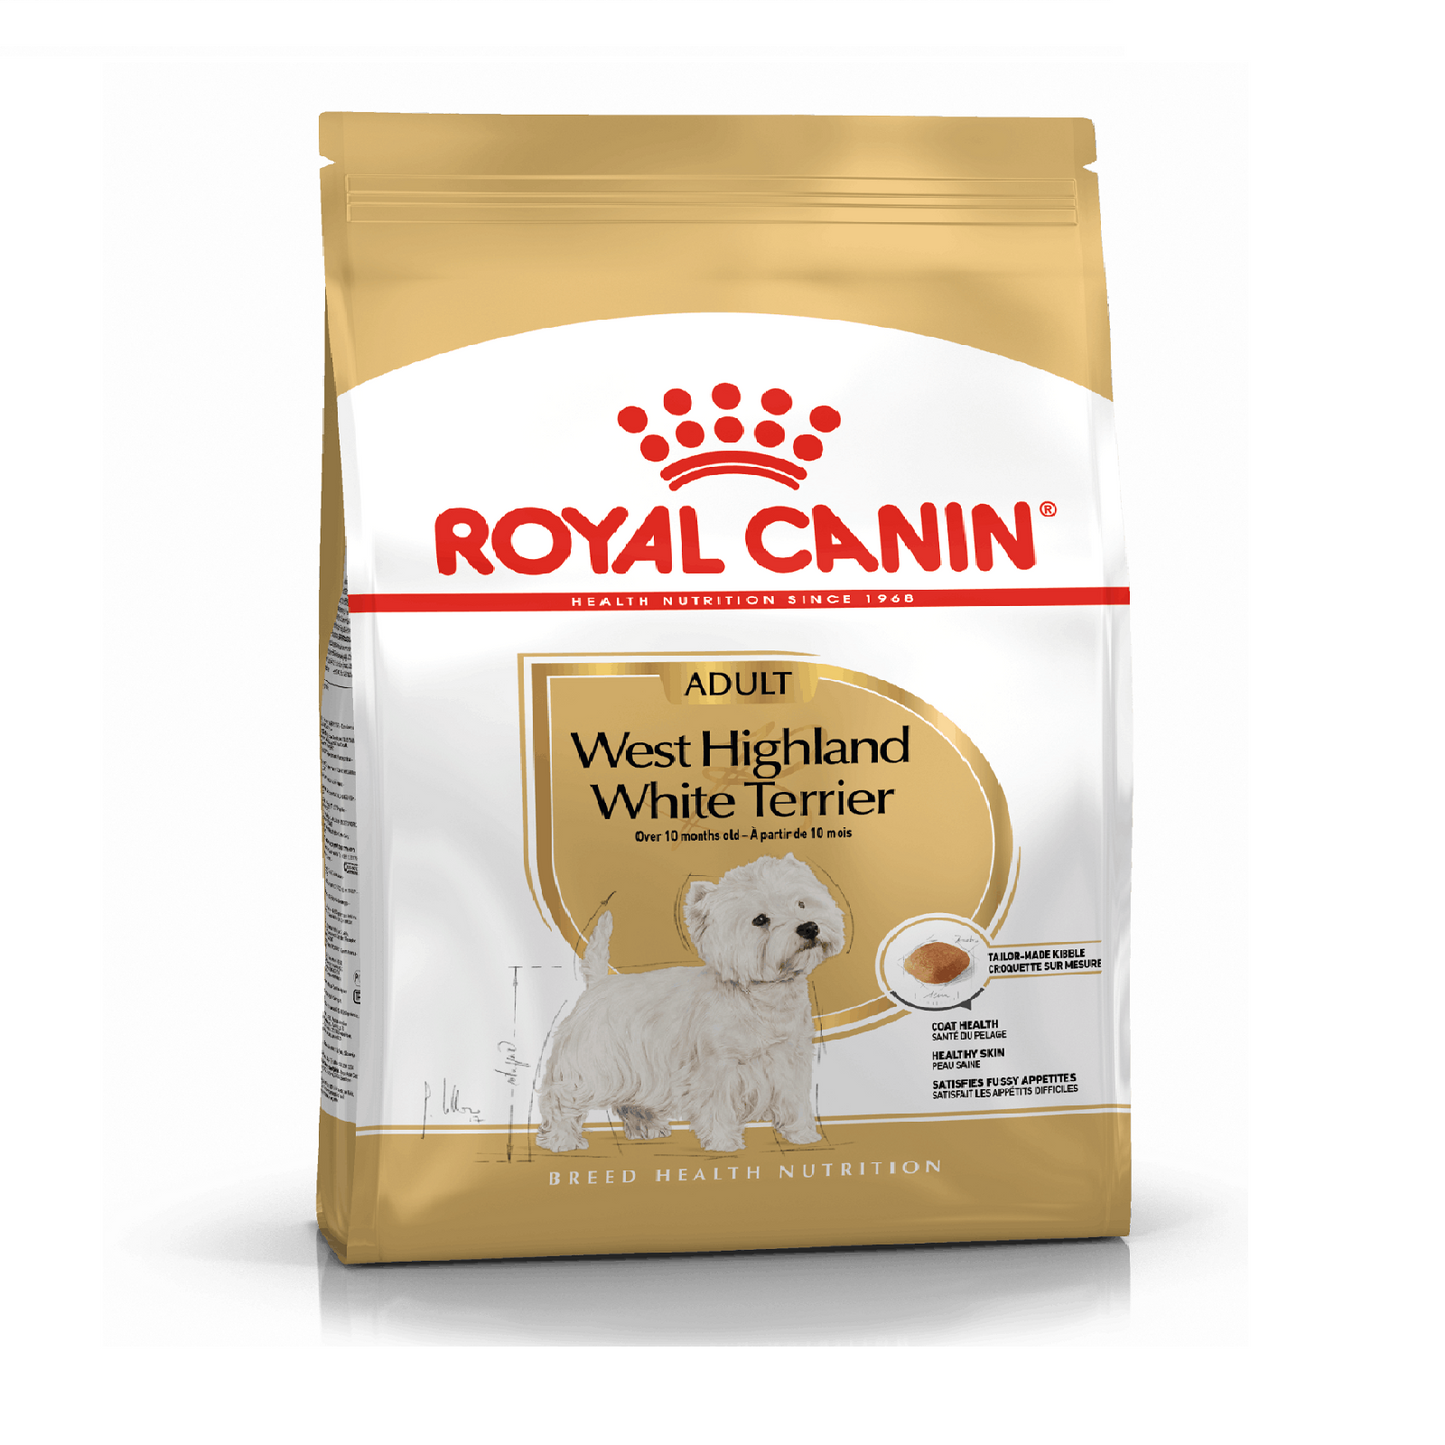 ROYAL CANIN - West Highland White Terrier Adult